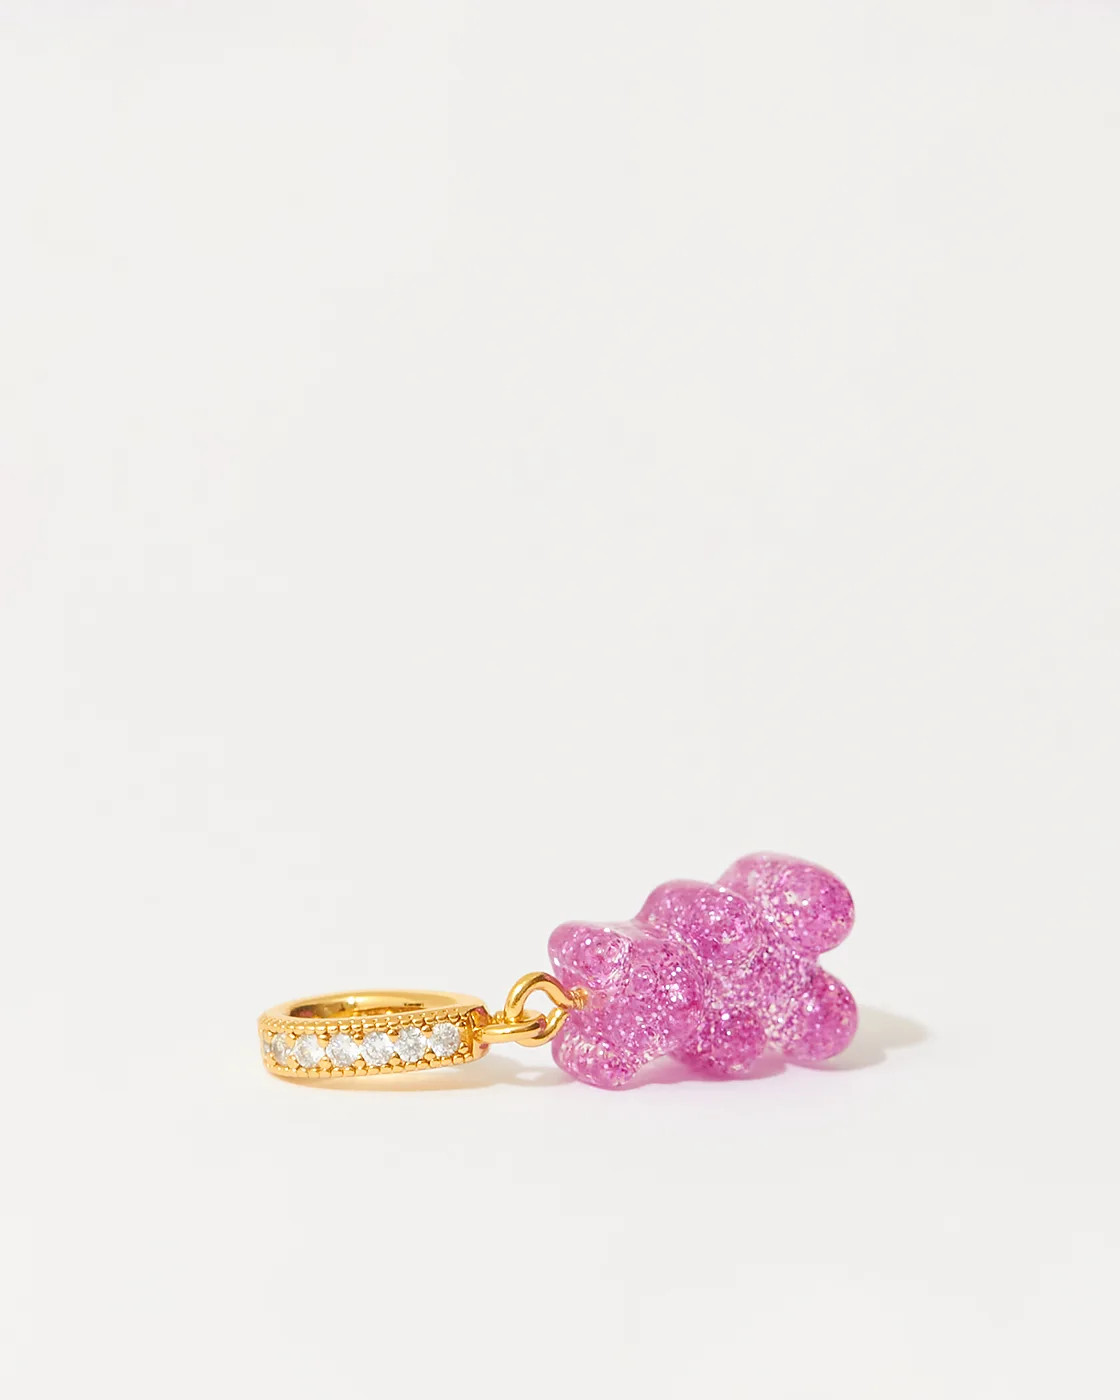 Nostalgia Bear Gold-Plated Resin Pendant with Pave Connector - Magenta